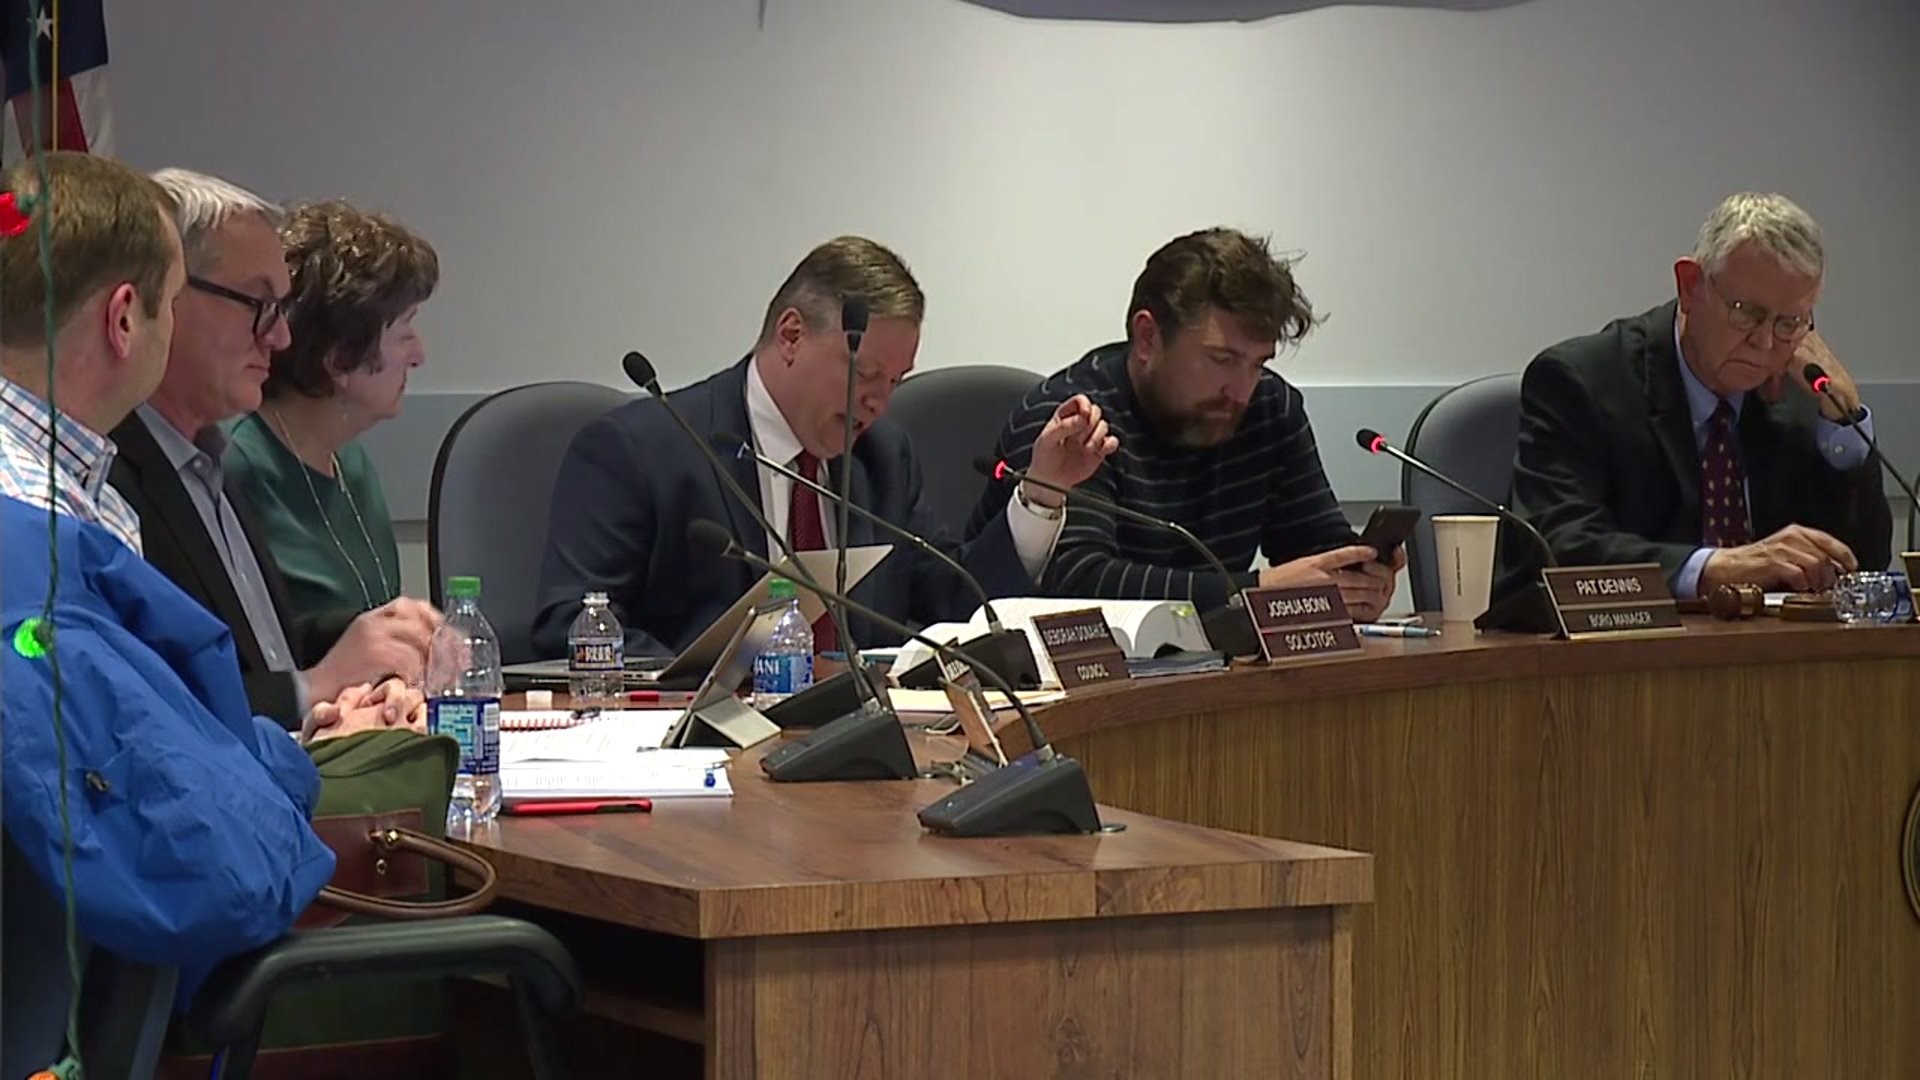 Camp Hill Council votes to not approve plans to bring Chick-fil-A to borough